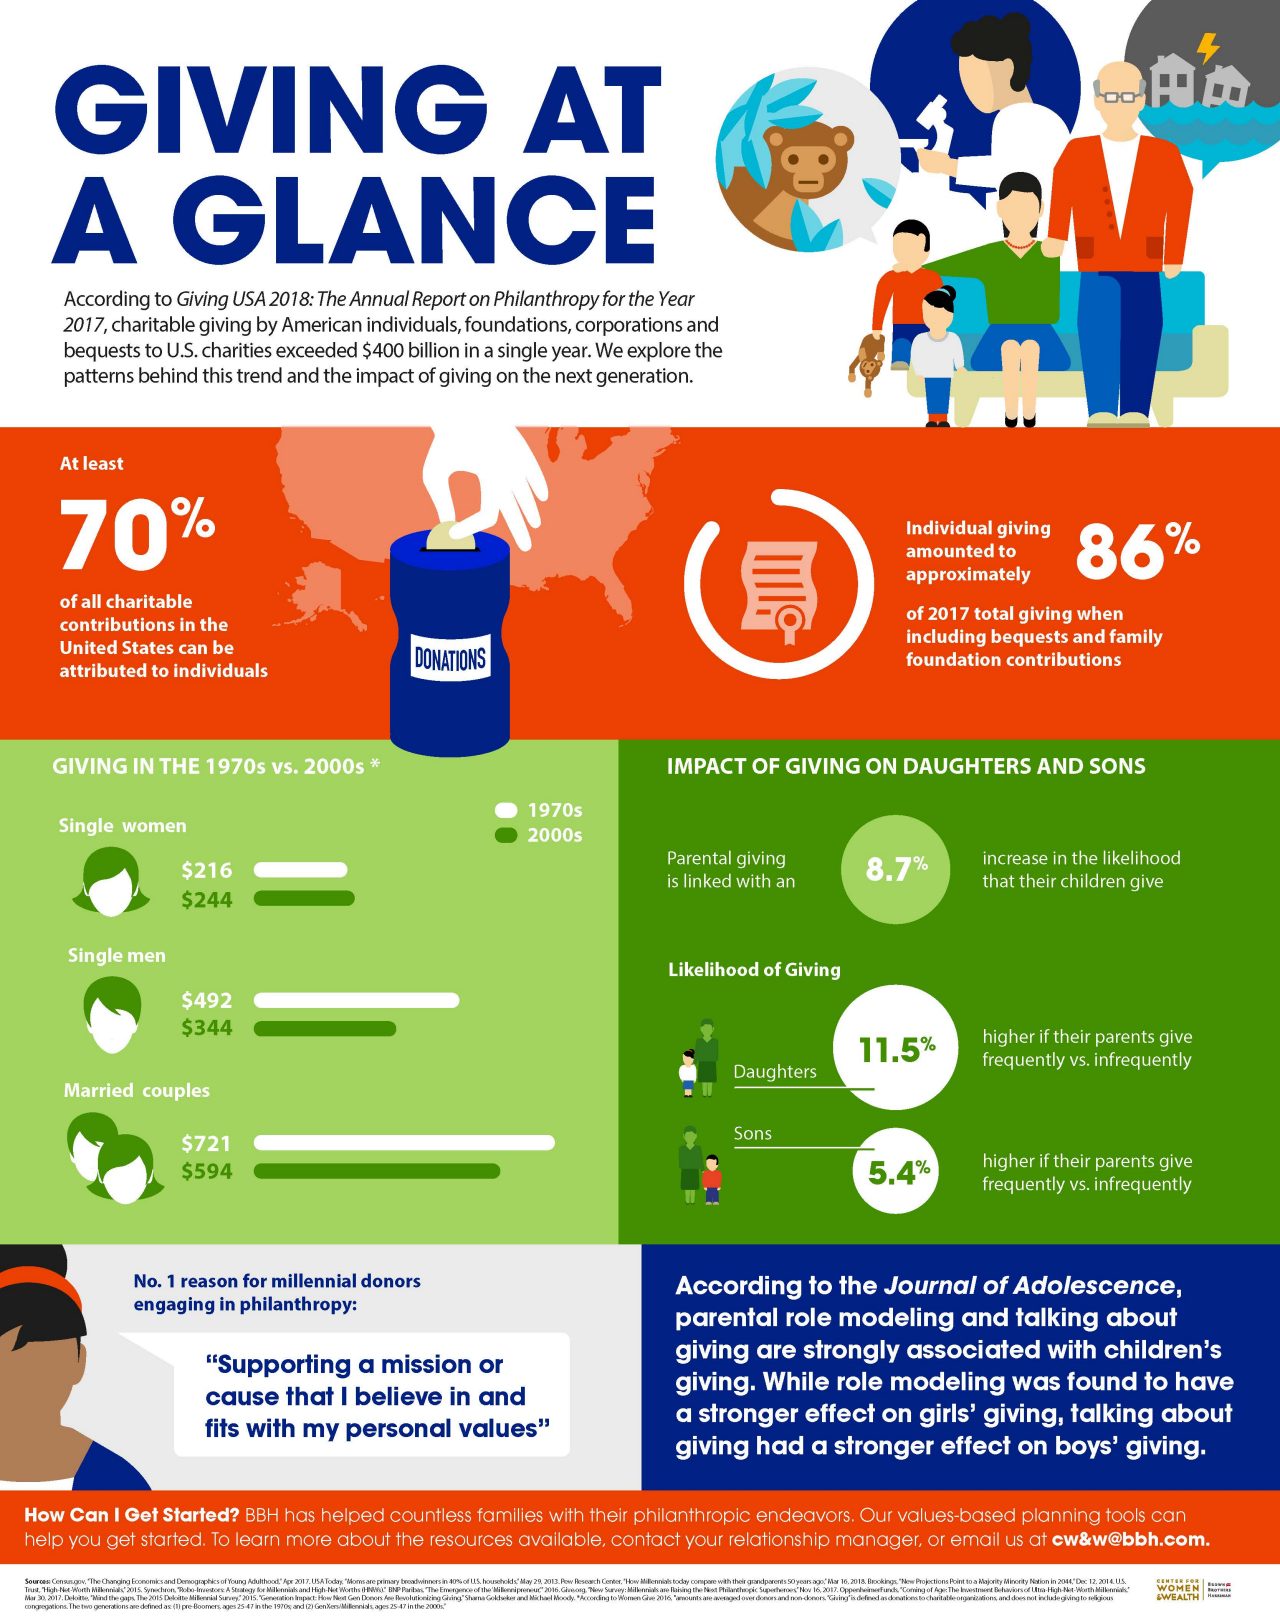 Giving at a Glance infographic data